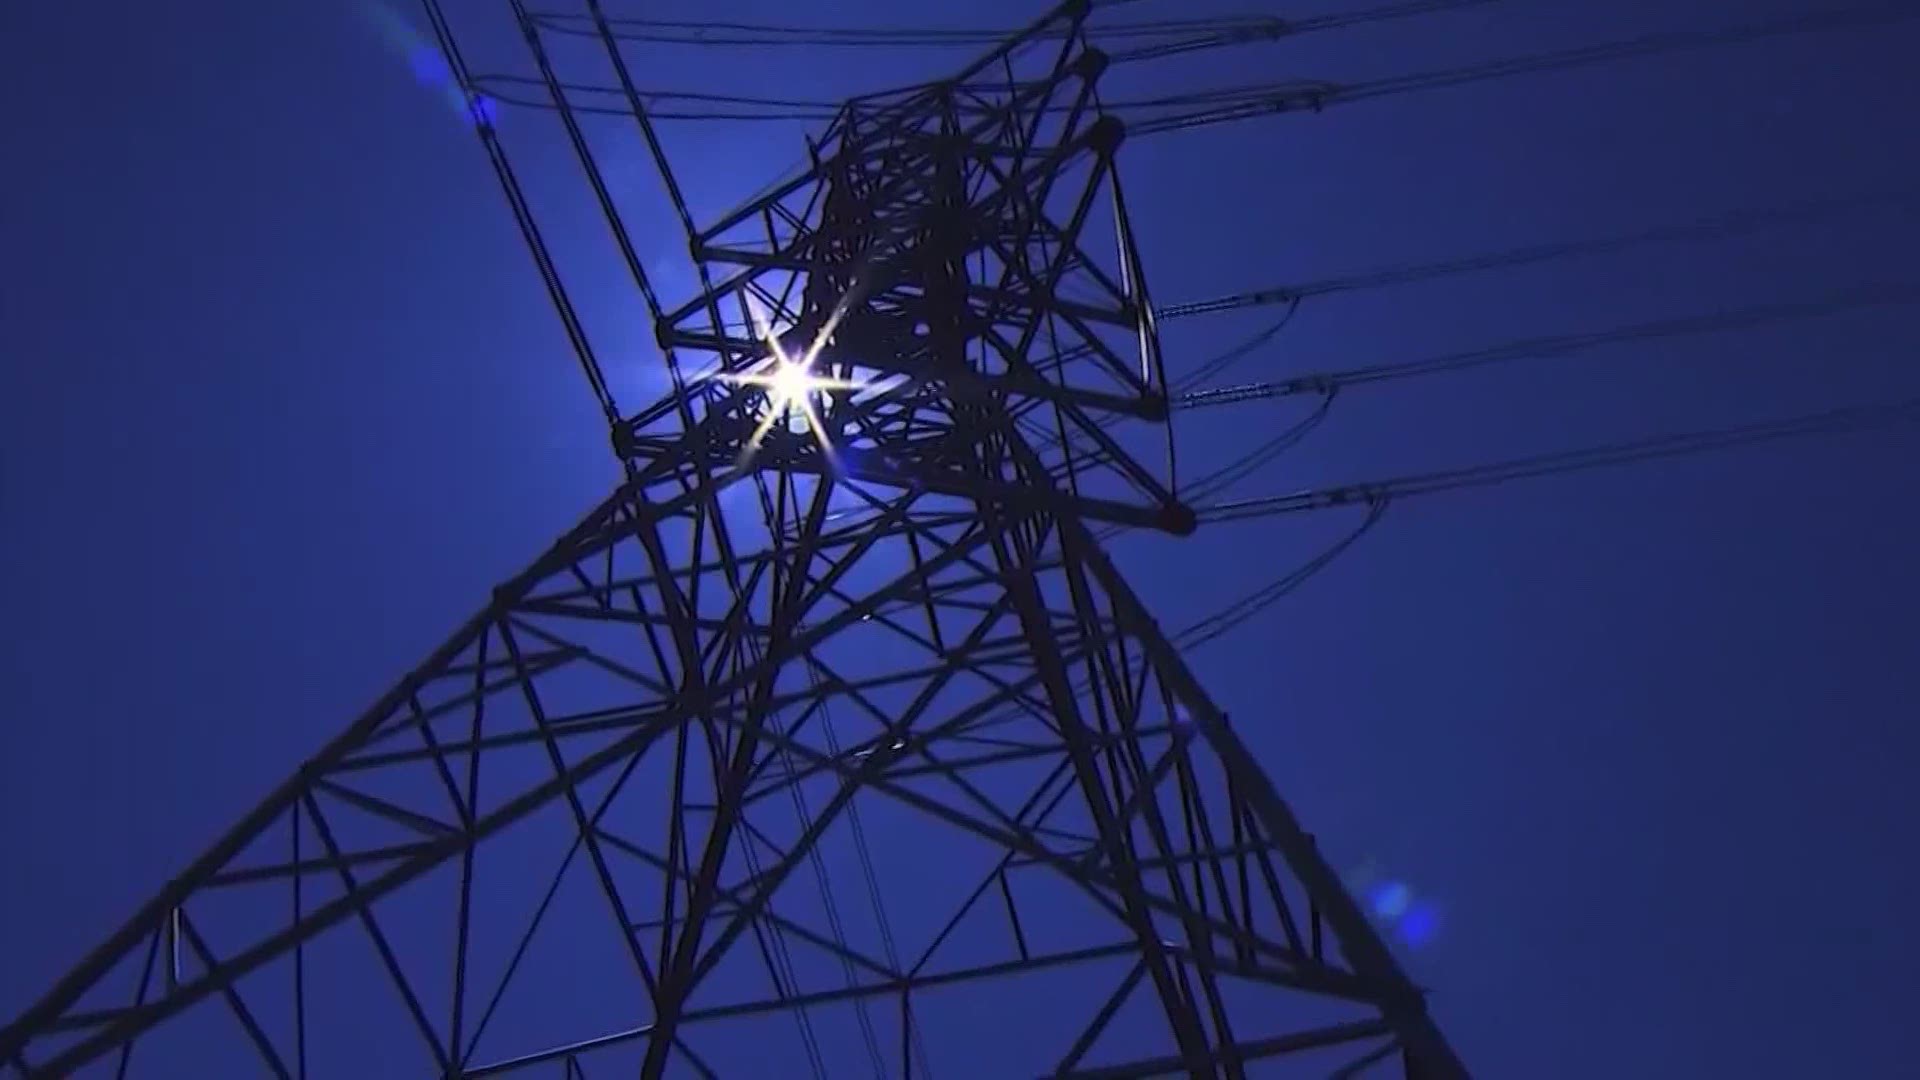 Temperatures are soaring across Texas and ERCOT is asking everyone to reduce electricity use to avoid emergency power outages.